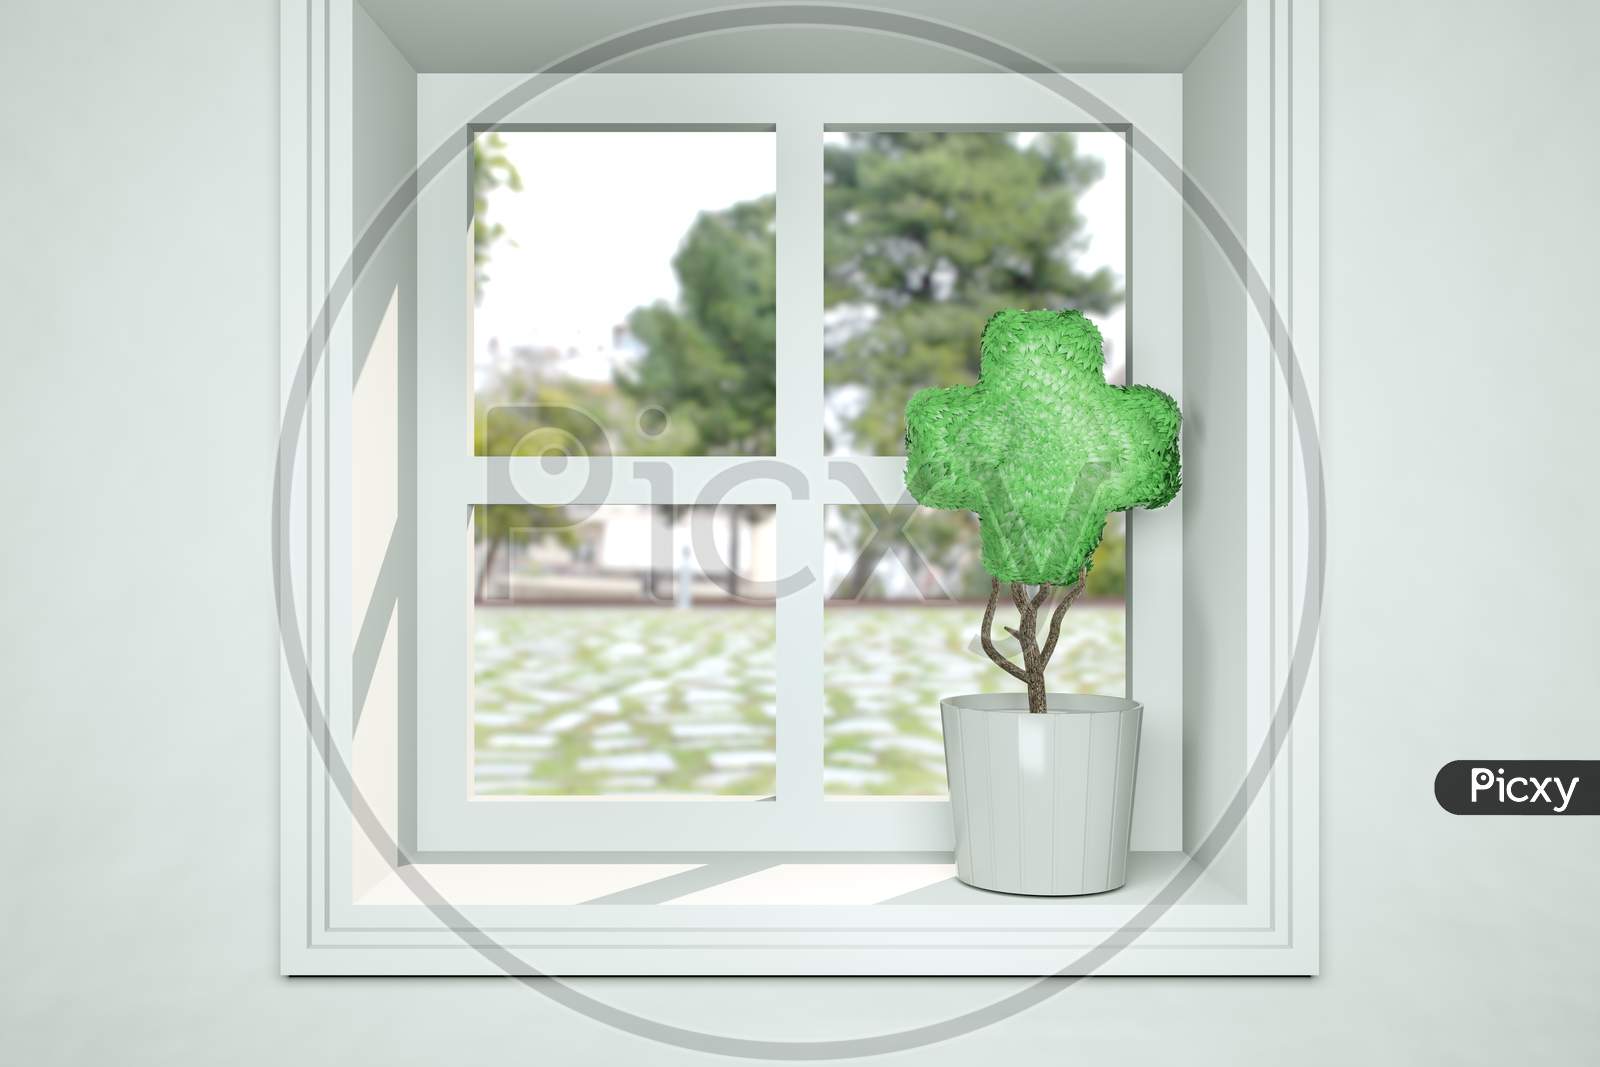 Small Plant In Pot On Window As A Plant Shaped Cross At Sunny Day. Healthcare Medical Or First Aid Concept